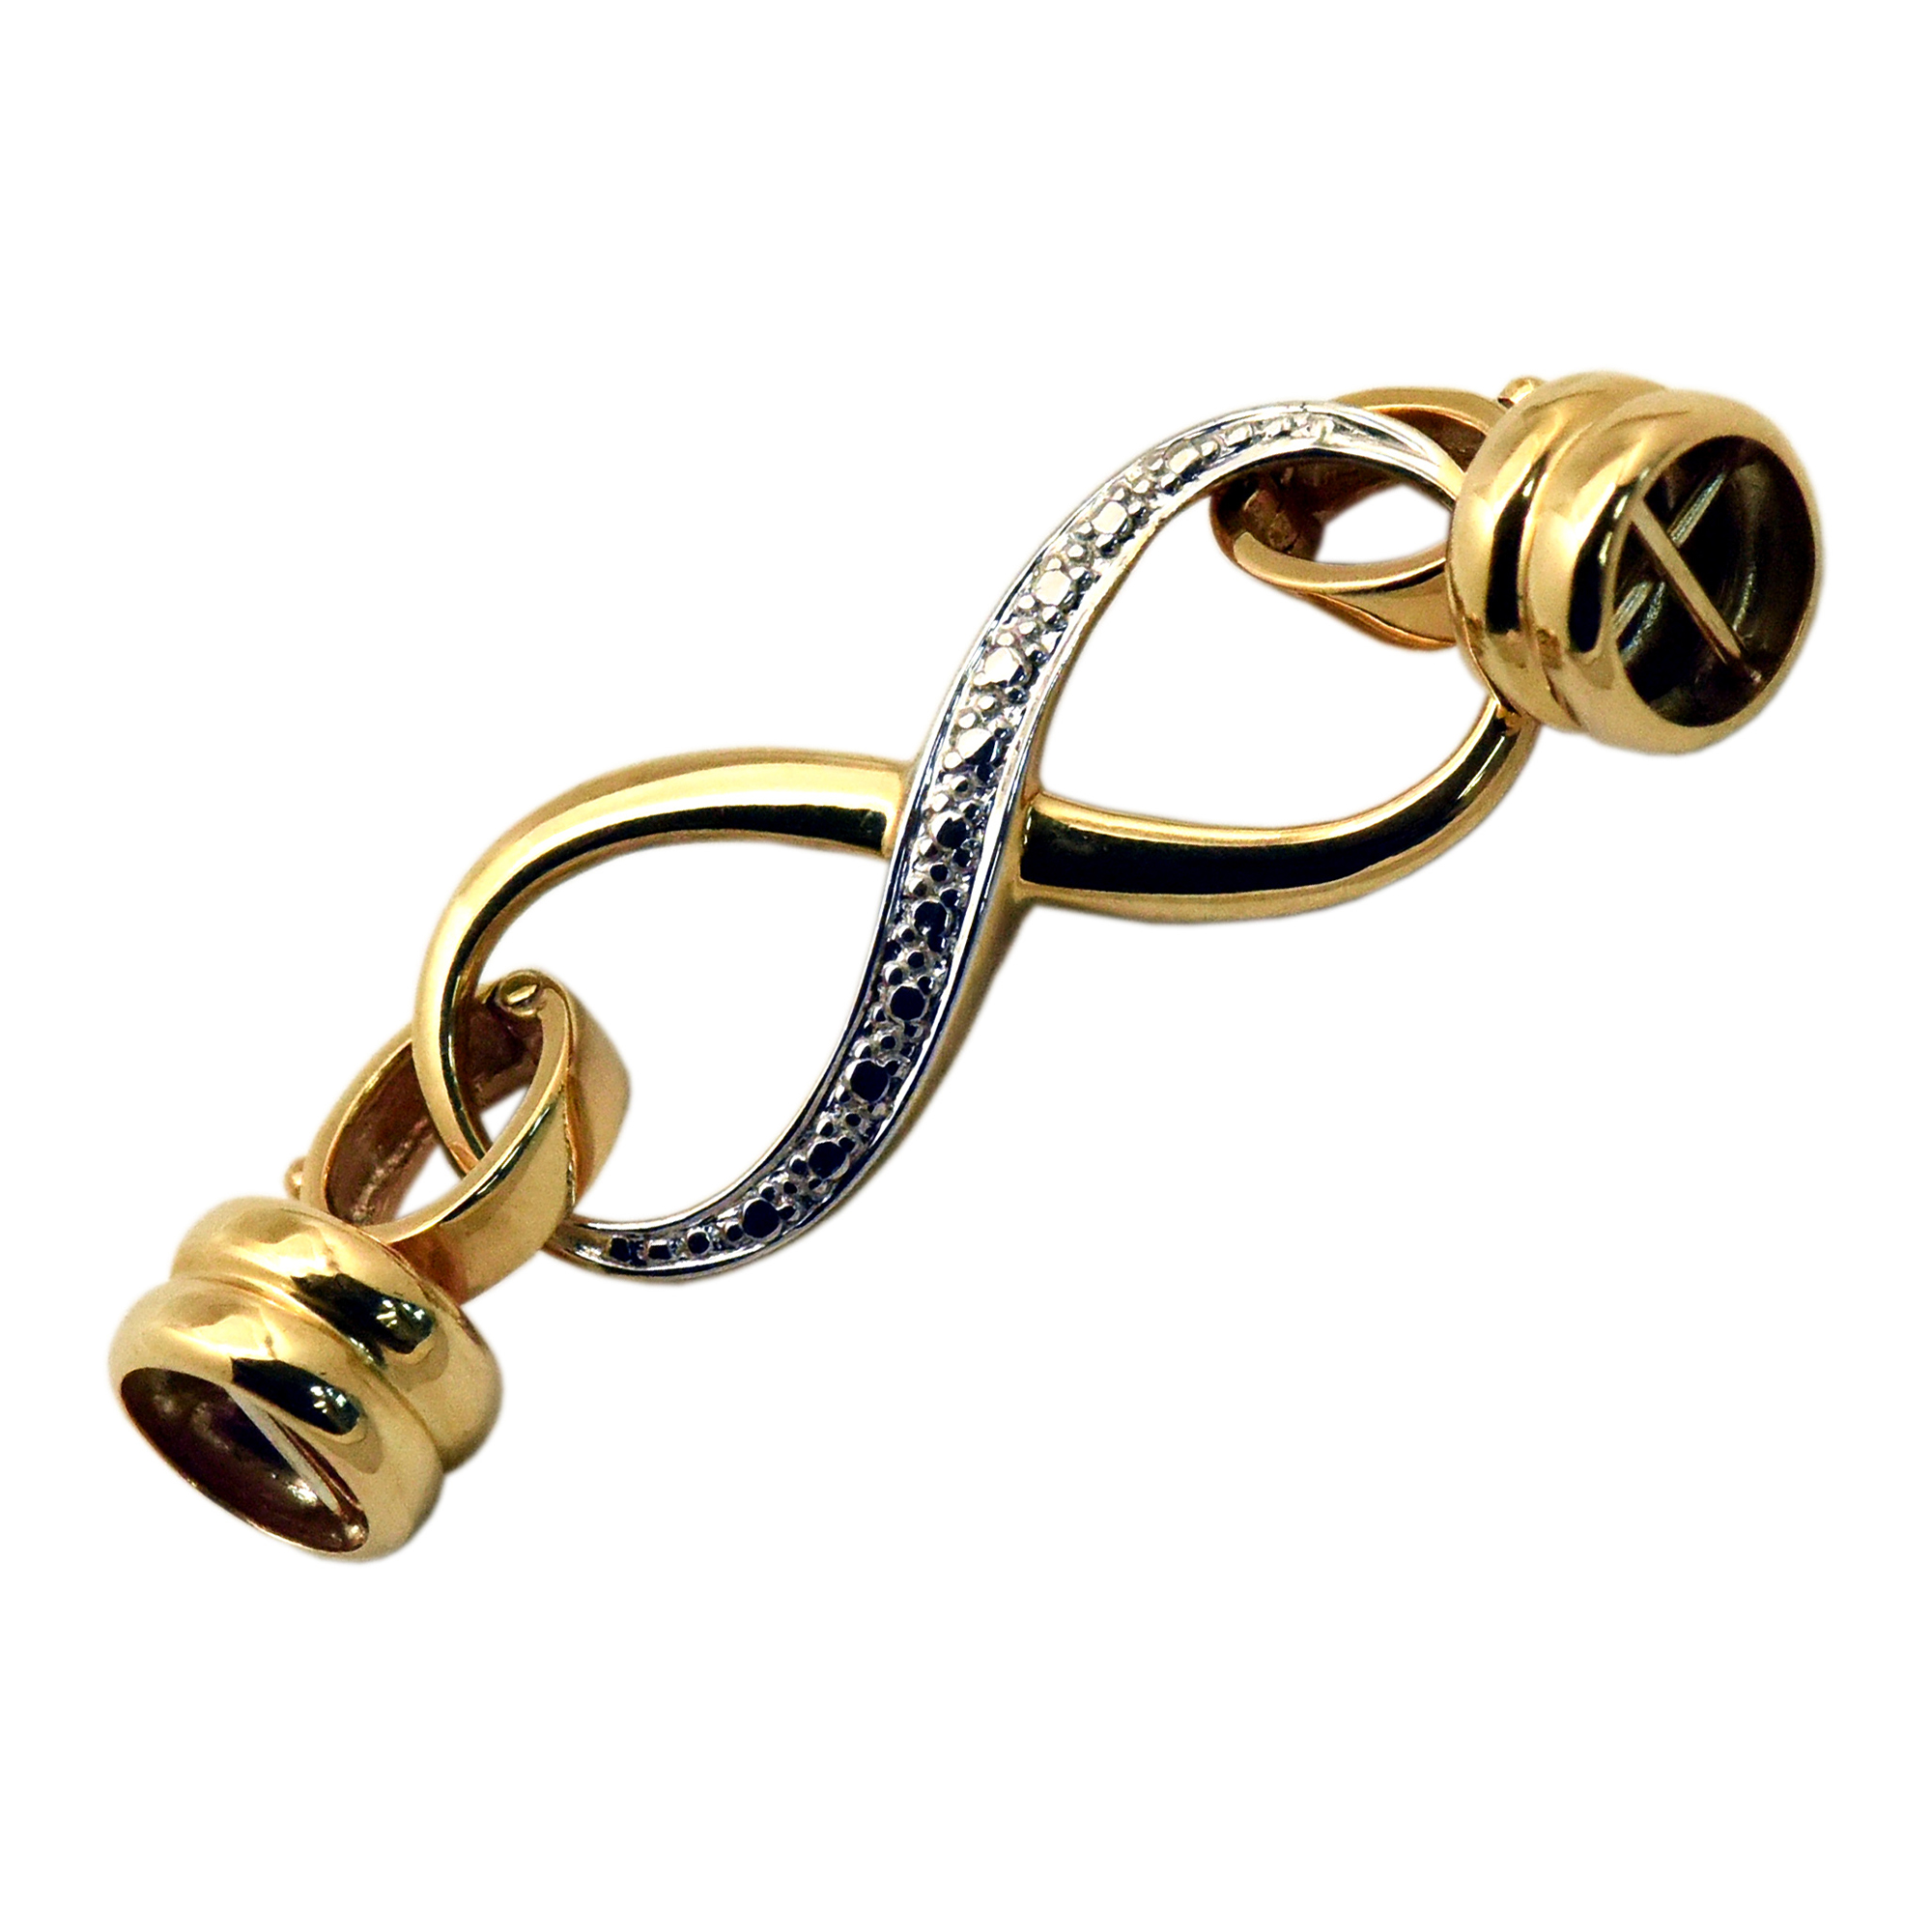 SPRING RING-CUP CLASPS